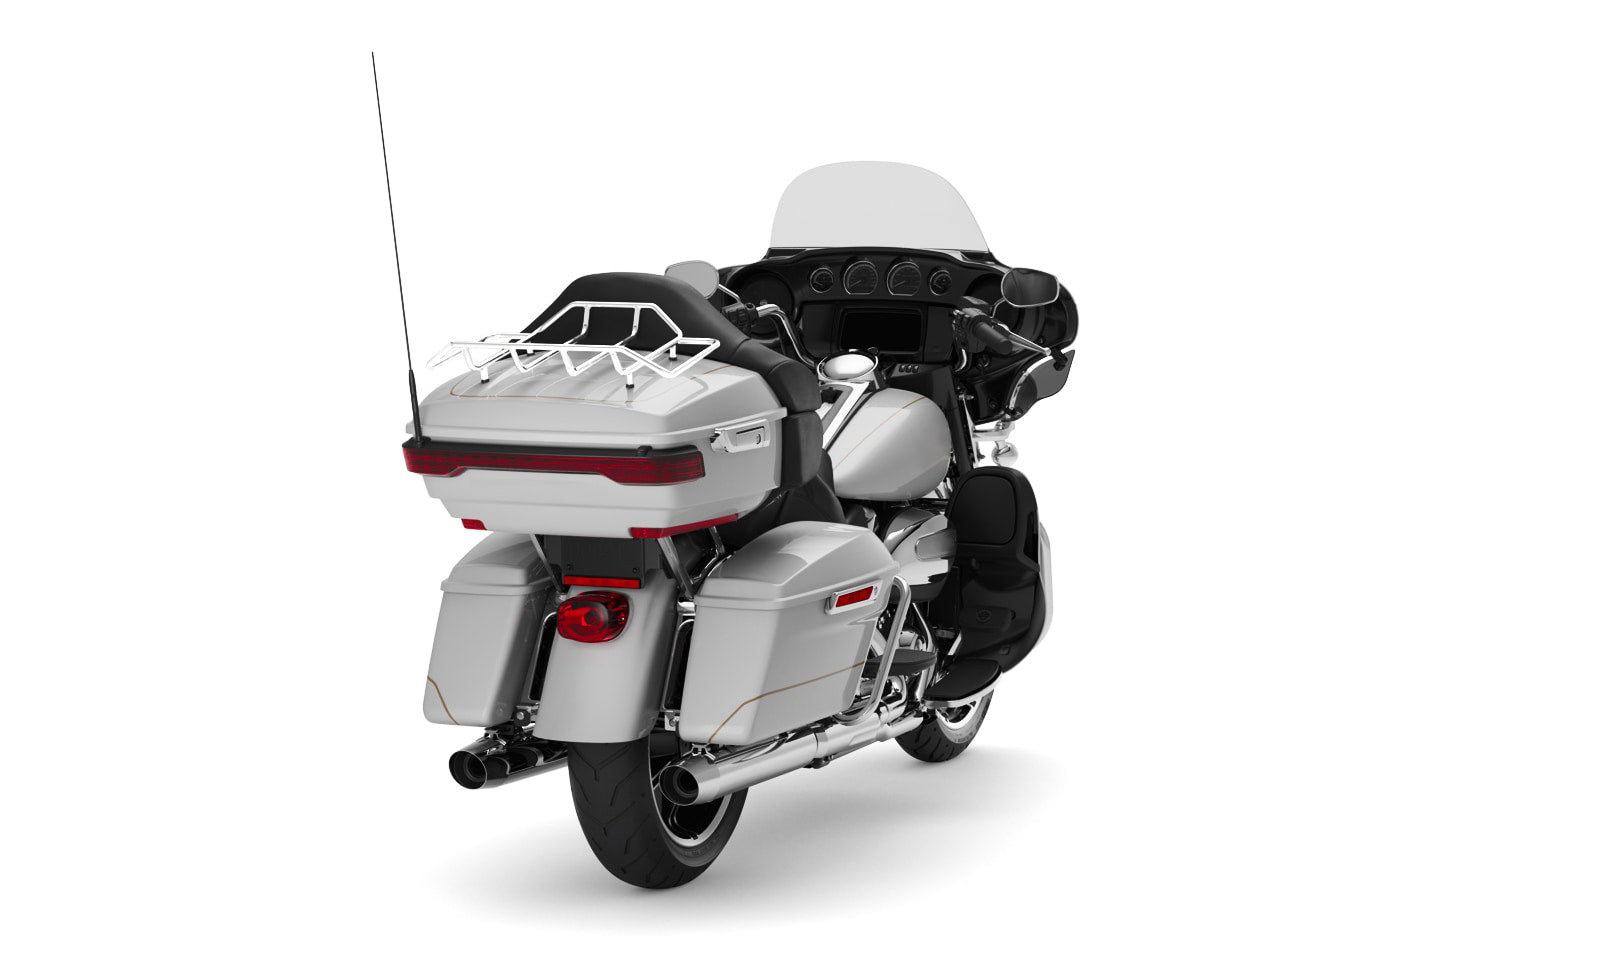 Viking Voyage Tour Pack Luggage Rack for Harley Road Glide Chrome Bag on Bike View @expand